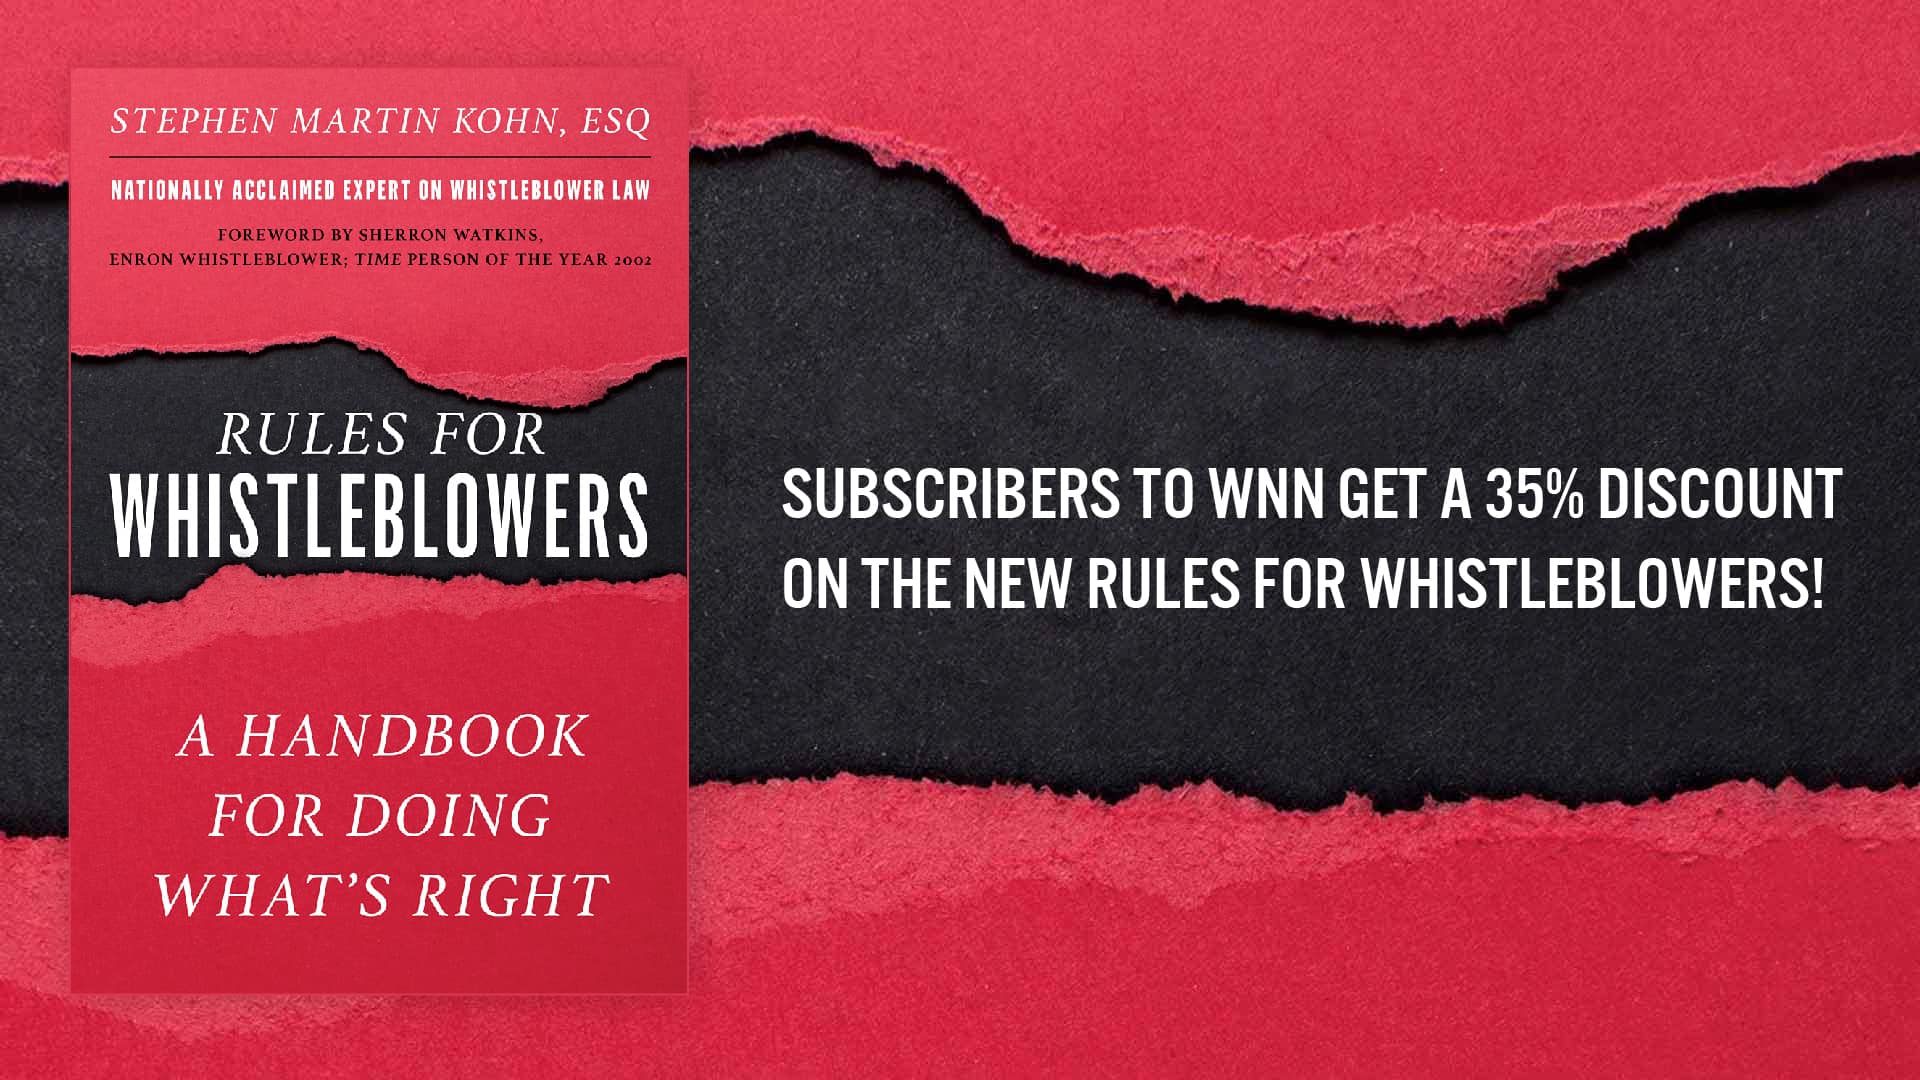 Get 35 Percent Off Rules for Whistleblowers When you Subscribe to Whistleblower Network News